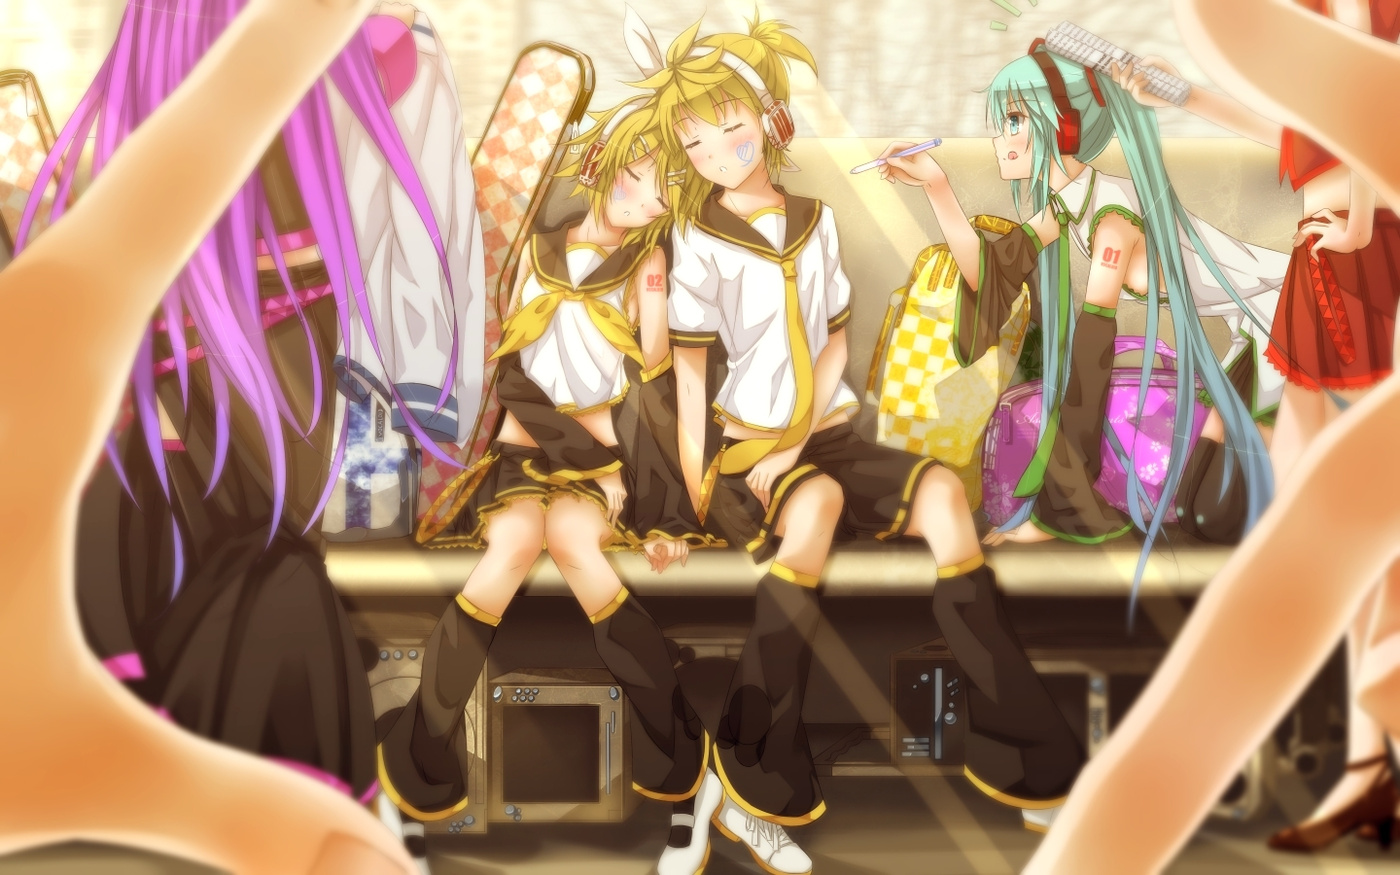 http://images5.fanpop.com/image/photos/26400000/Rin-and-Len-and-the-others-rin-and-len-kagamine-26421504-1400-875.png